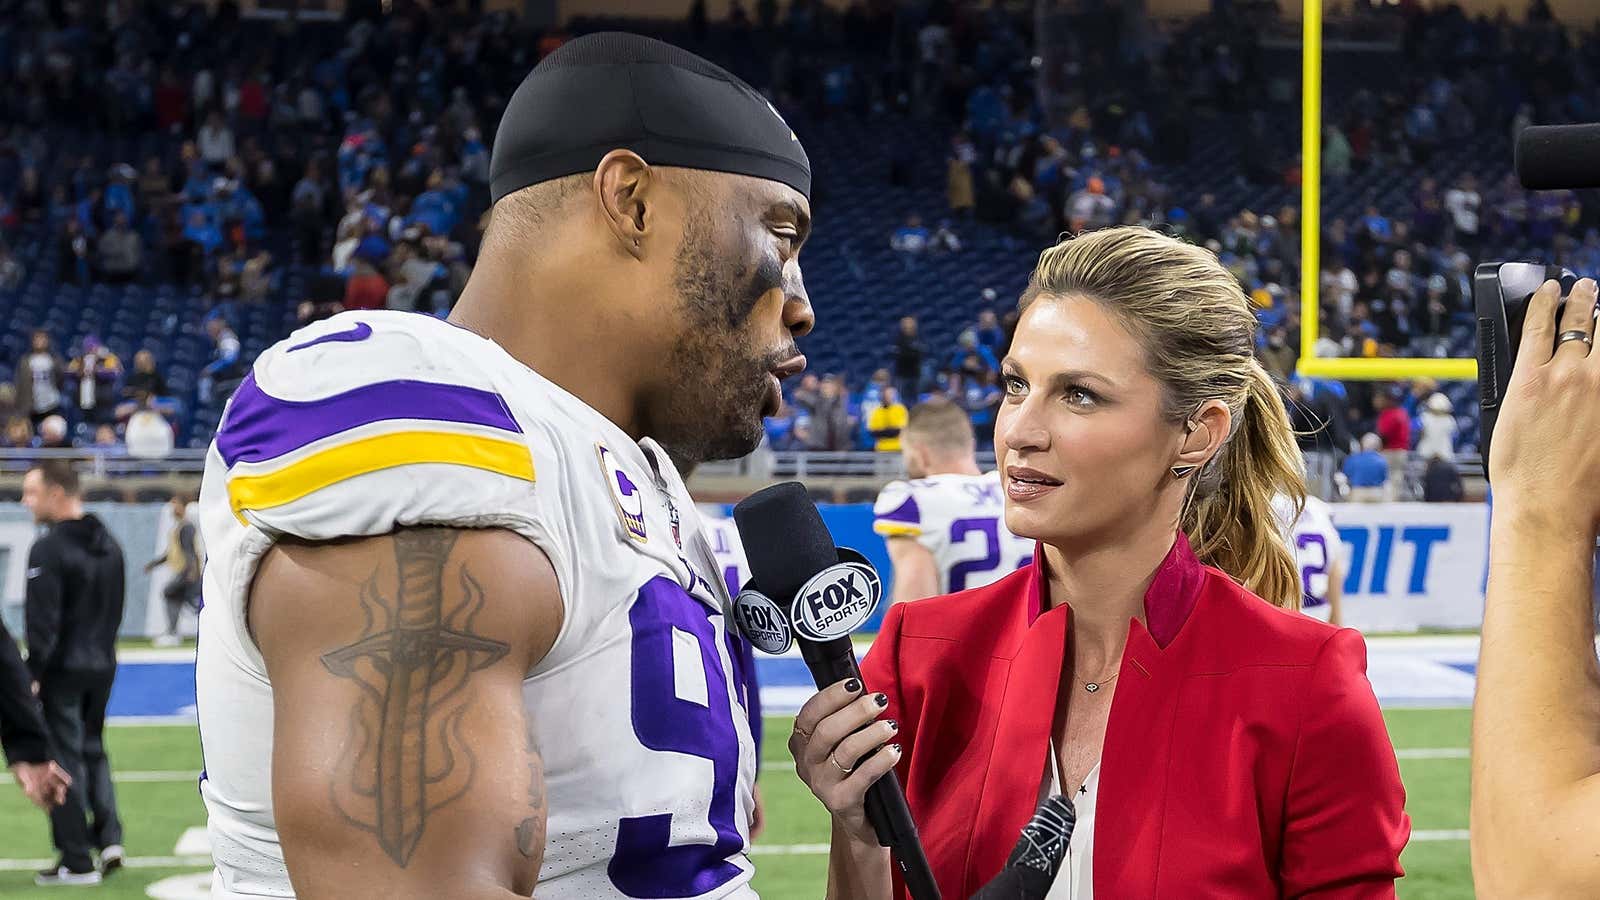 Erin Andrews has been the target of sexual harassment as a result of her job.